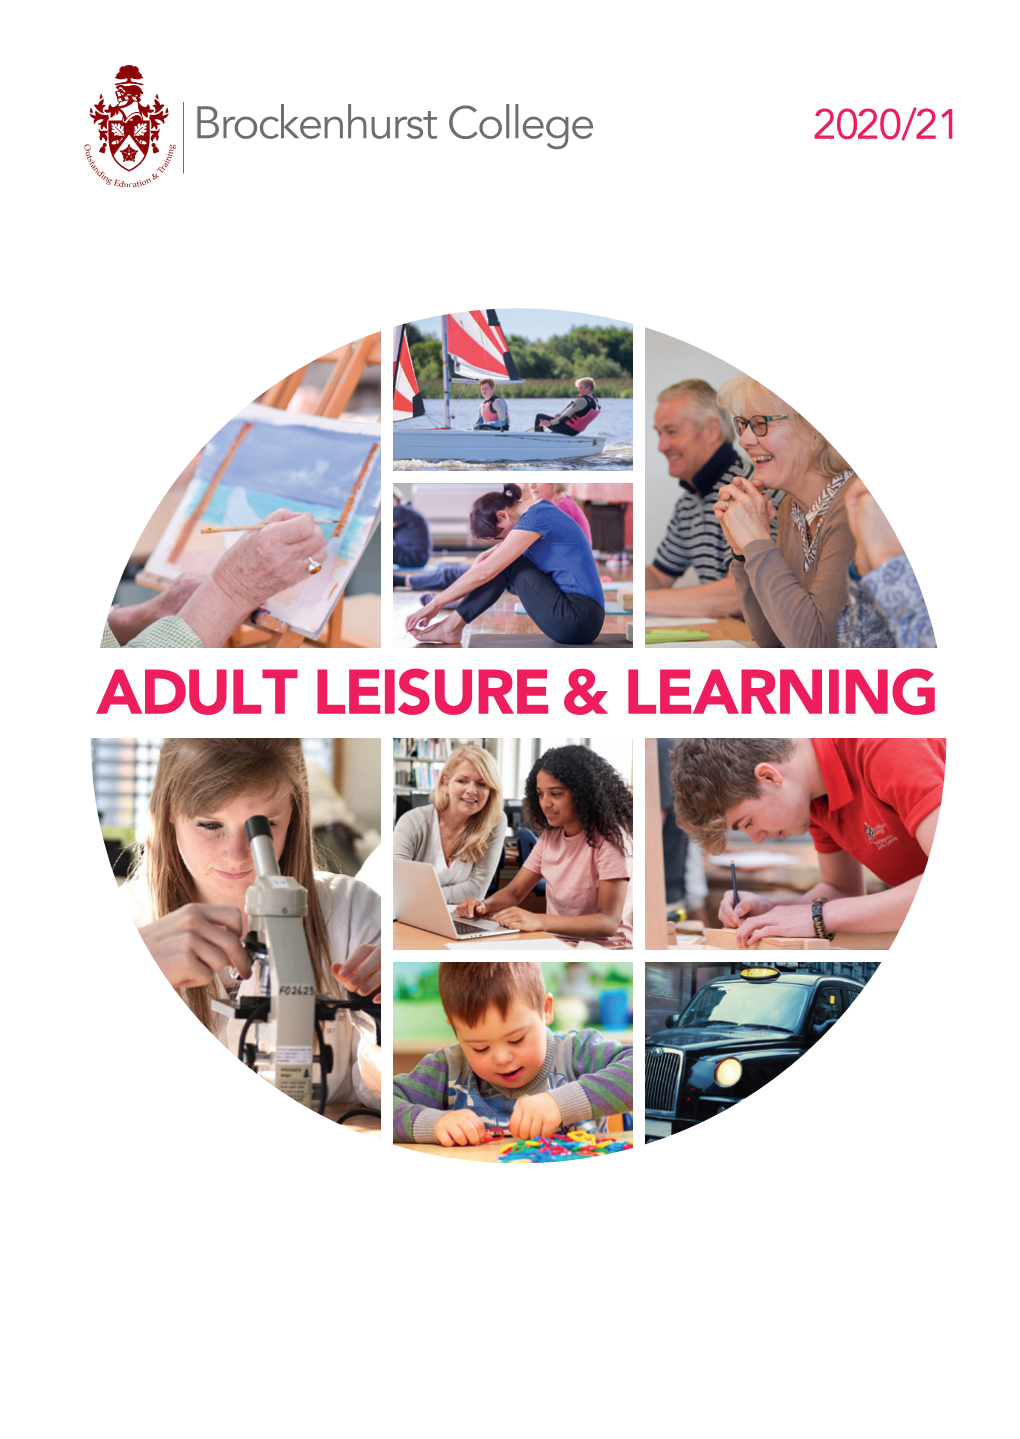 Adult Leisure & Learning